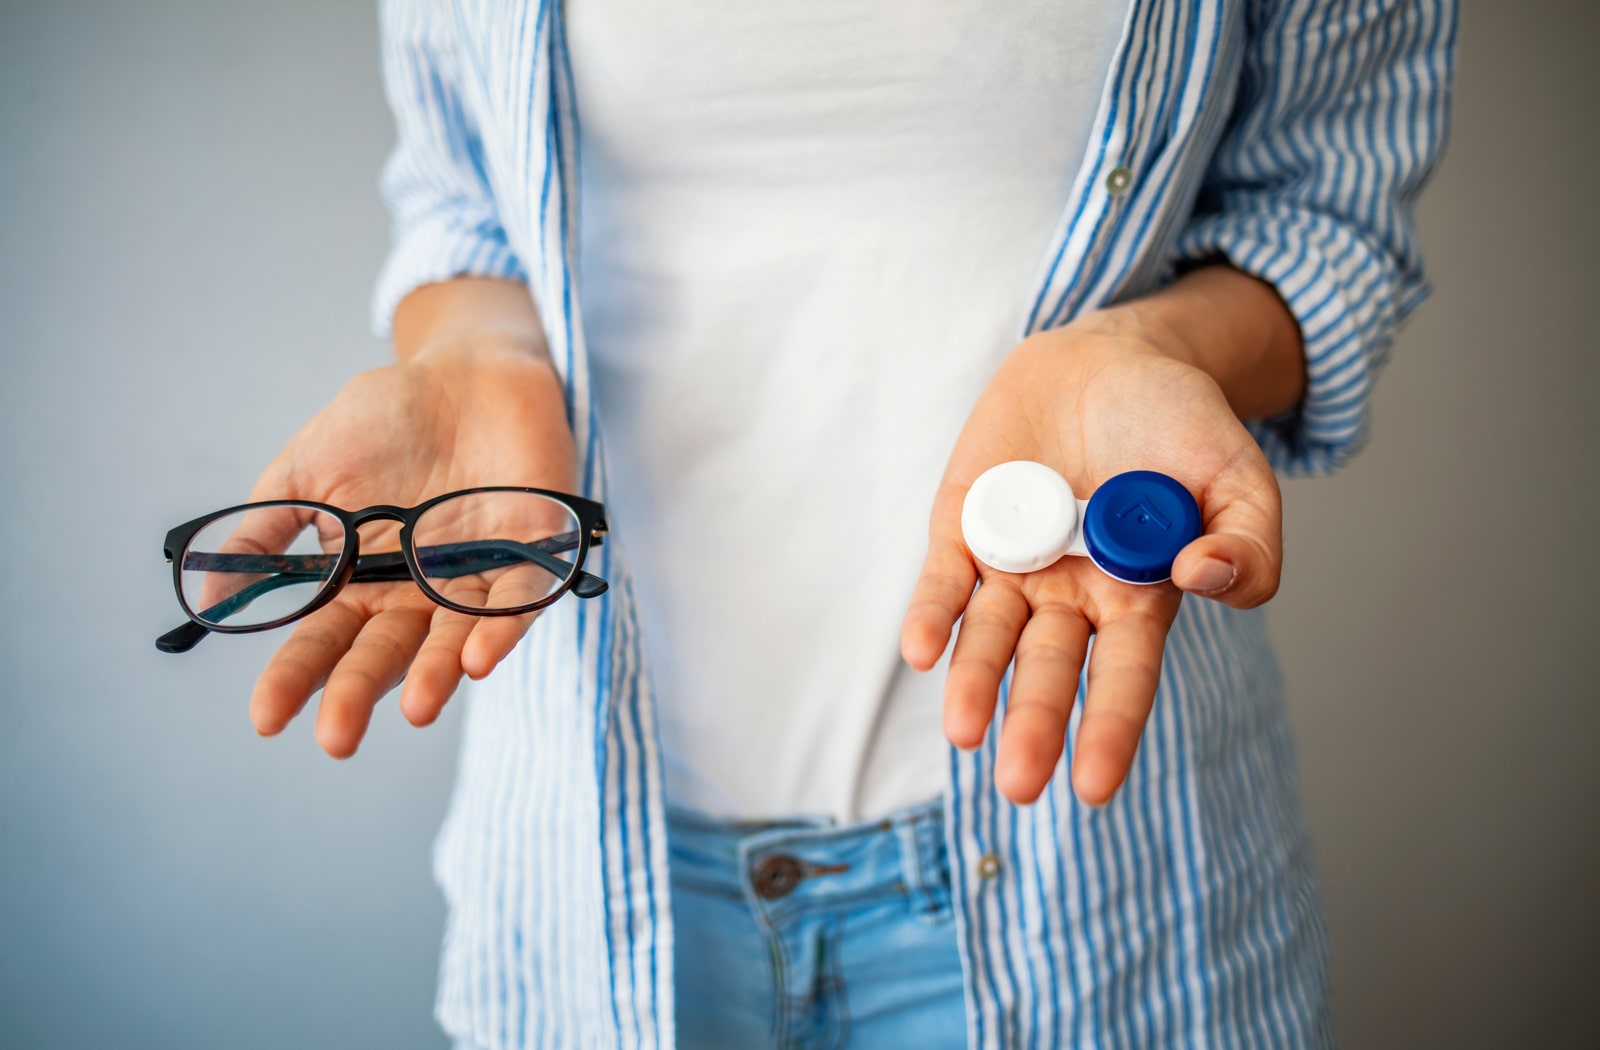 A woman holding on to a pair of glasses in her right hand and a contact lens case in her left hand